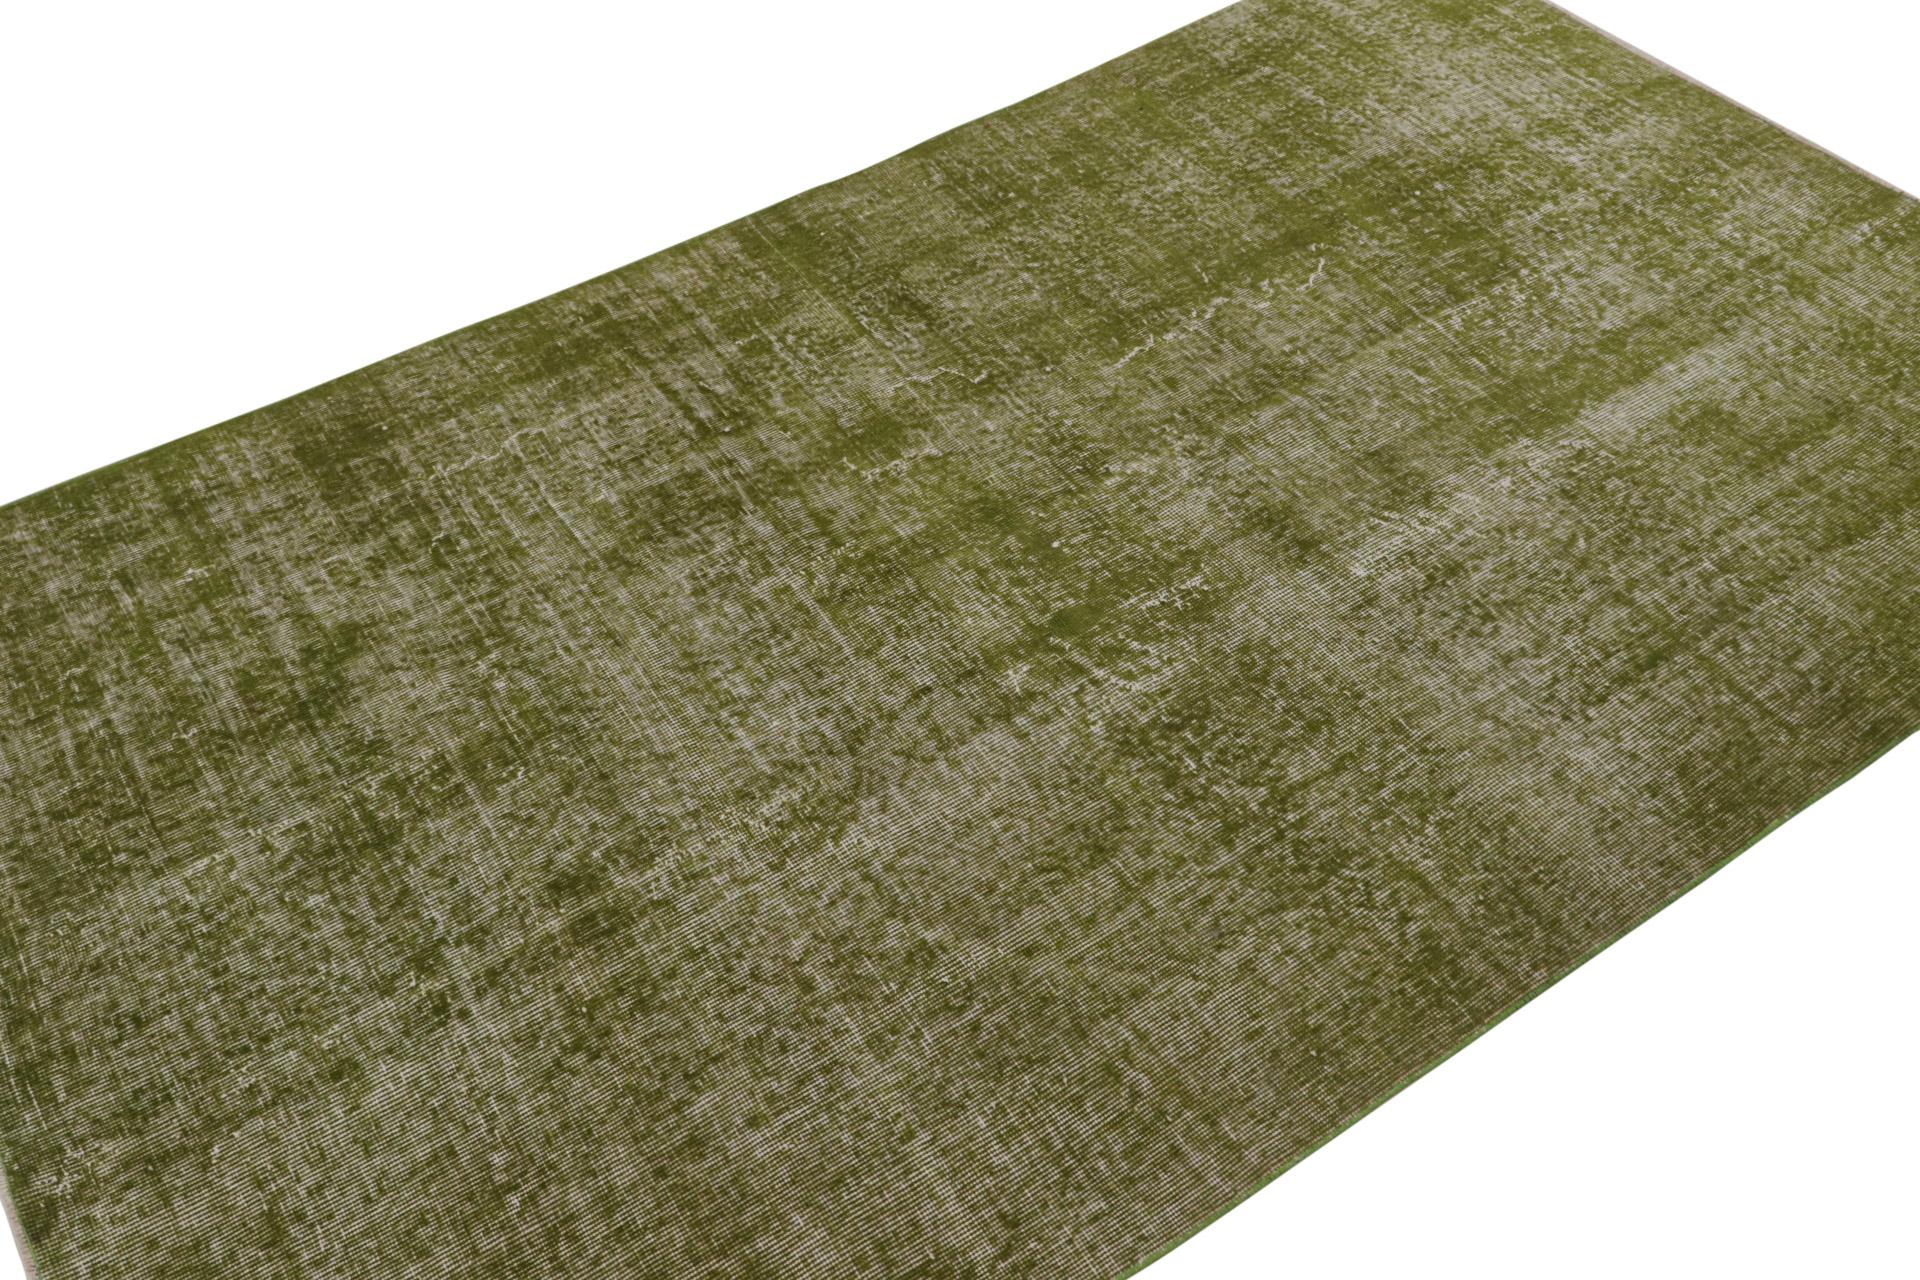 This vintage 5x8 rug, hand-knotted in wool, circa 1960-1970, is one of Zeki Müren’s rare pieces in ‘solid’ chartreuse green tones, features a muted look of pattern born of the weaving technique—subtle yet fabulous. 

On the Design: 

Connoisseurs